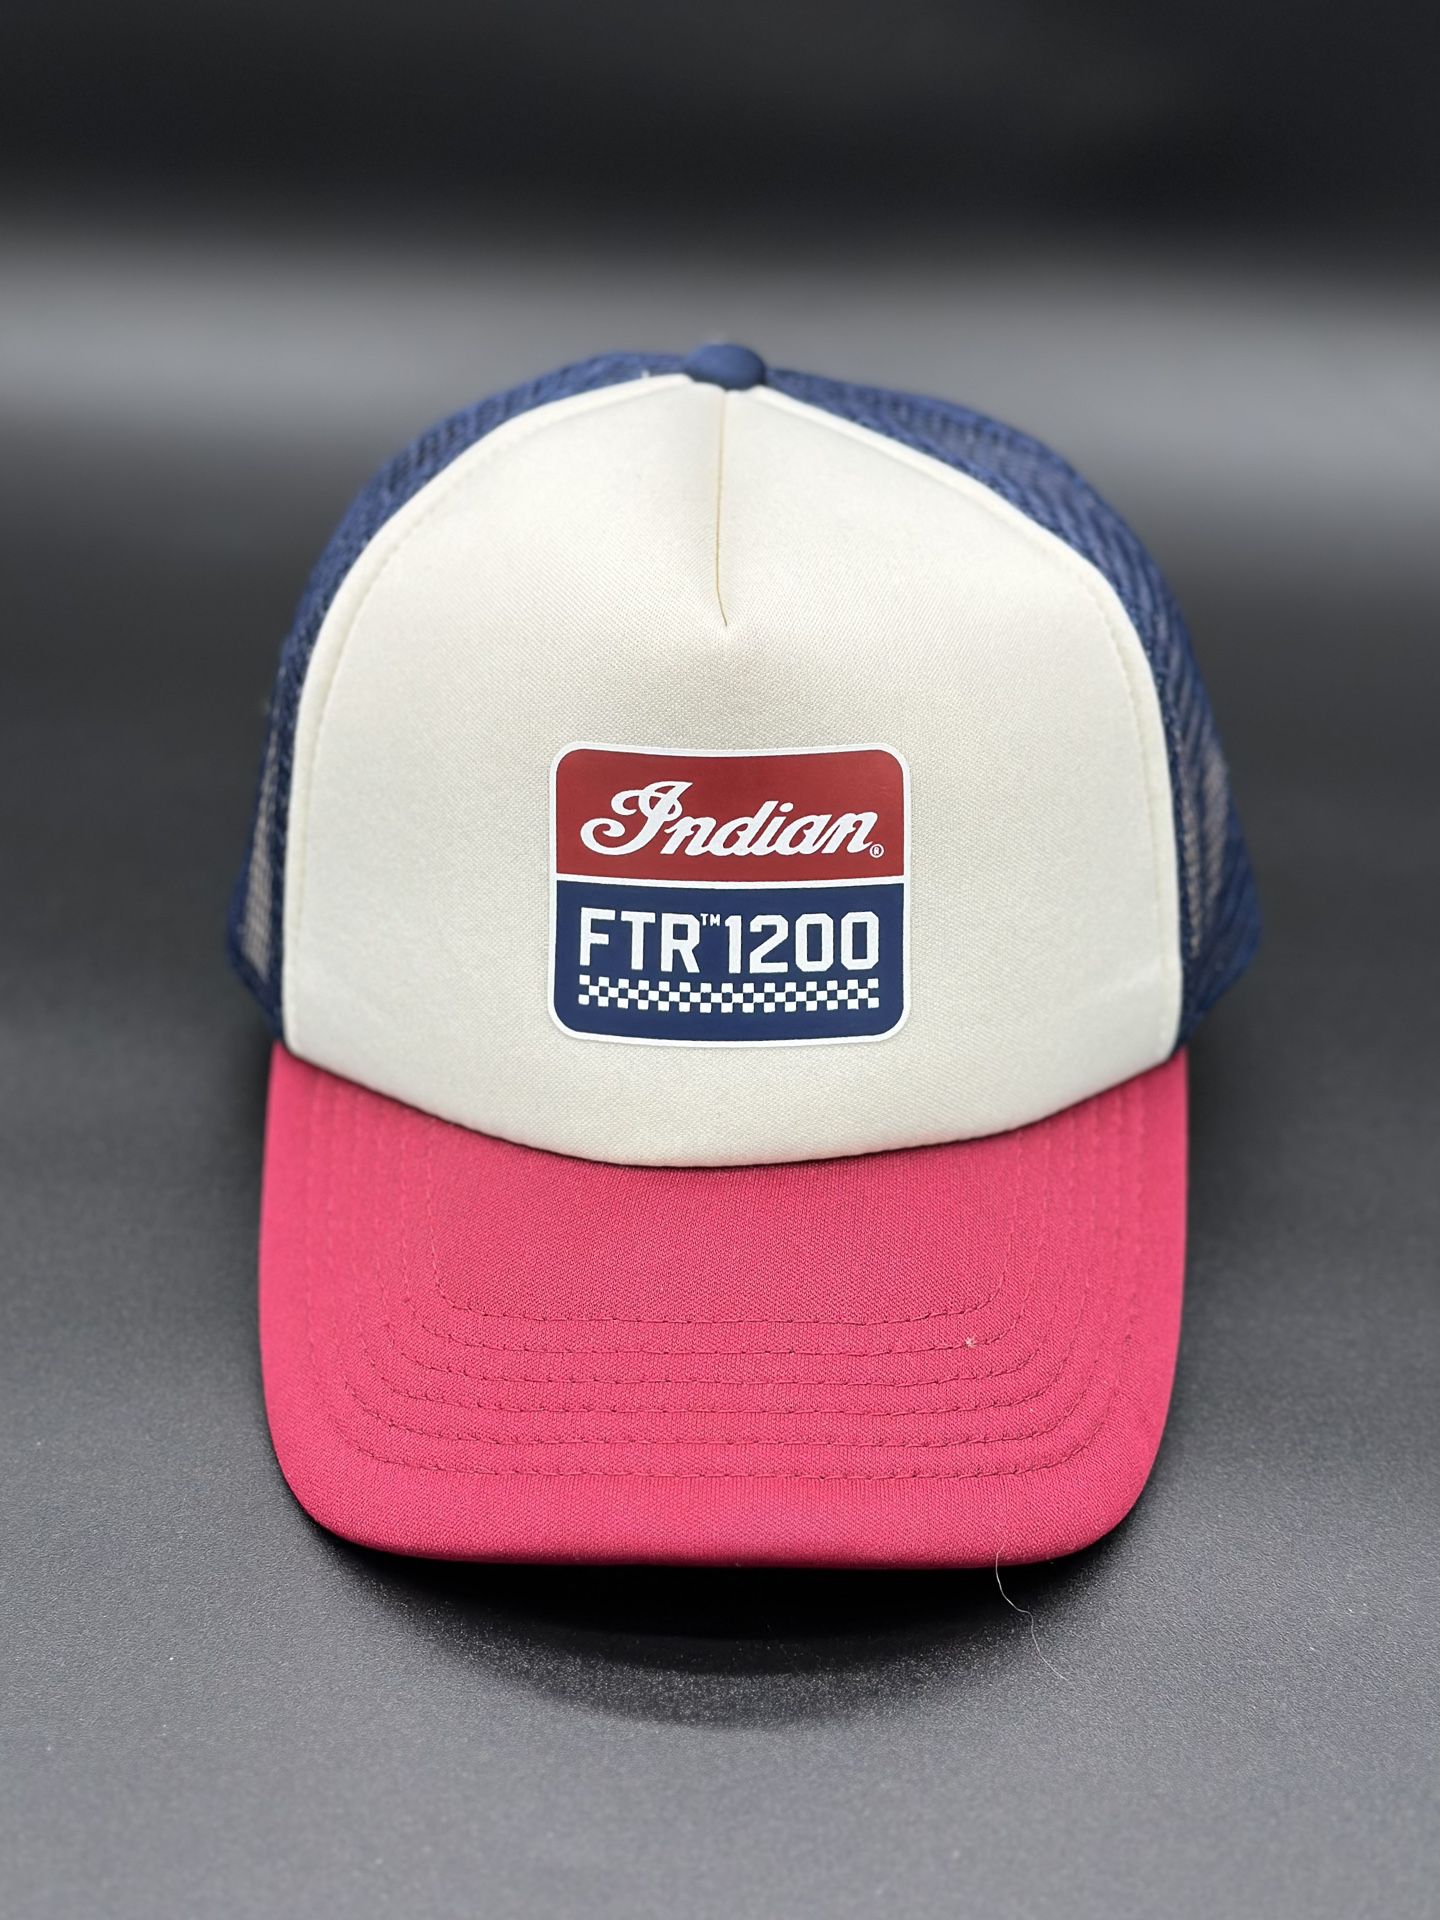 Indian Motorcycle Trucker Hat #(contact info removed) In Stock & Ready To Ship! #M29